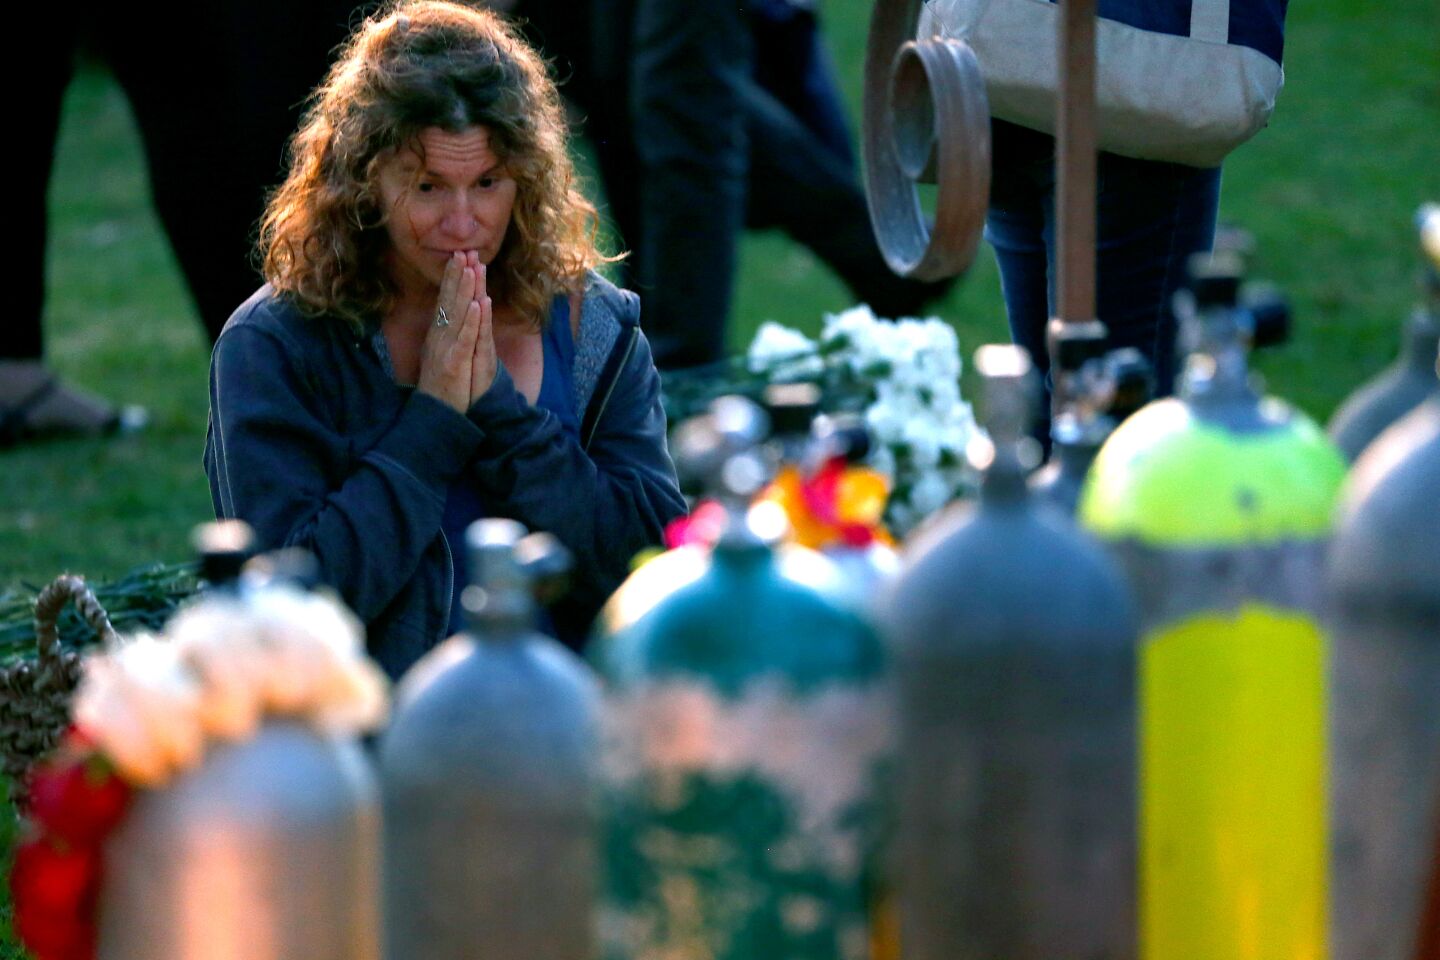 A mourner pays her respects at a memorial made up of scuba tanks, one for each victim, during the vigil at Chase Palm Park on Friday night.